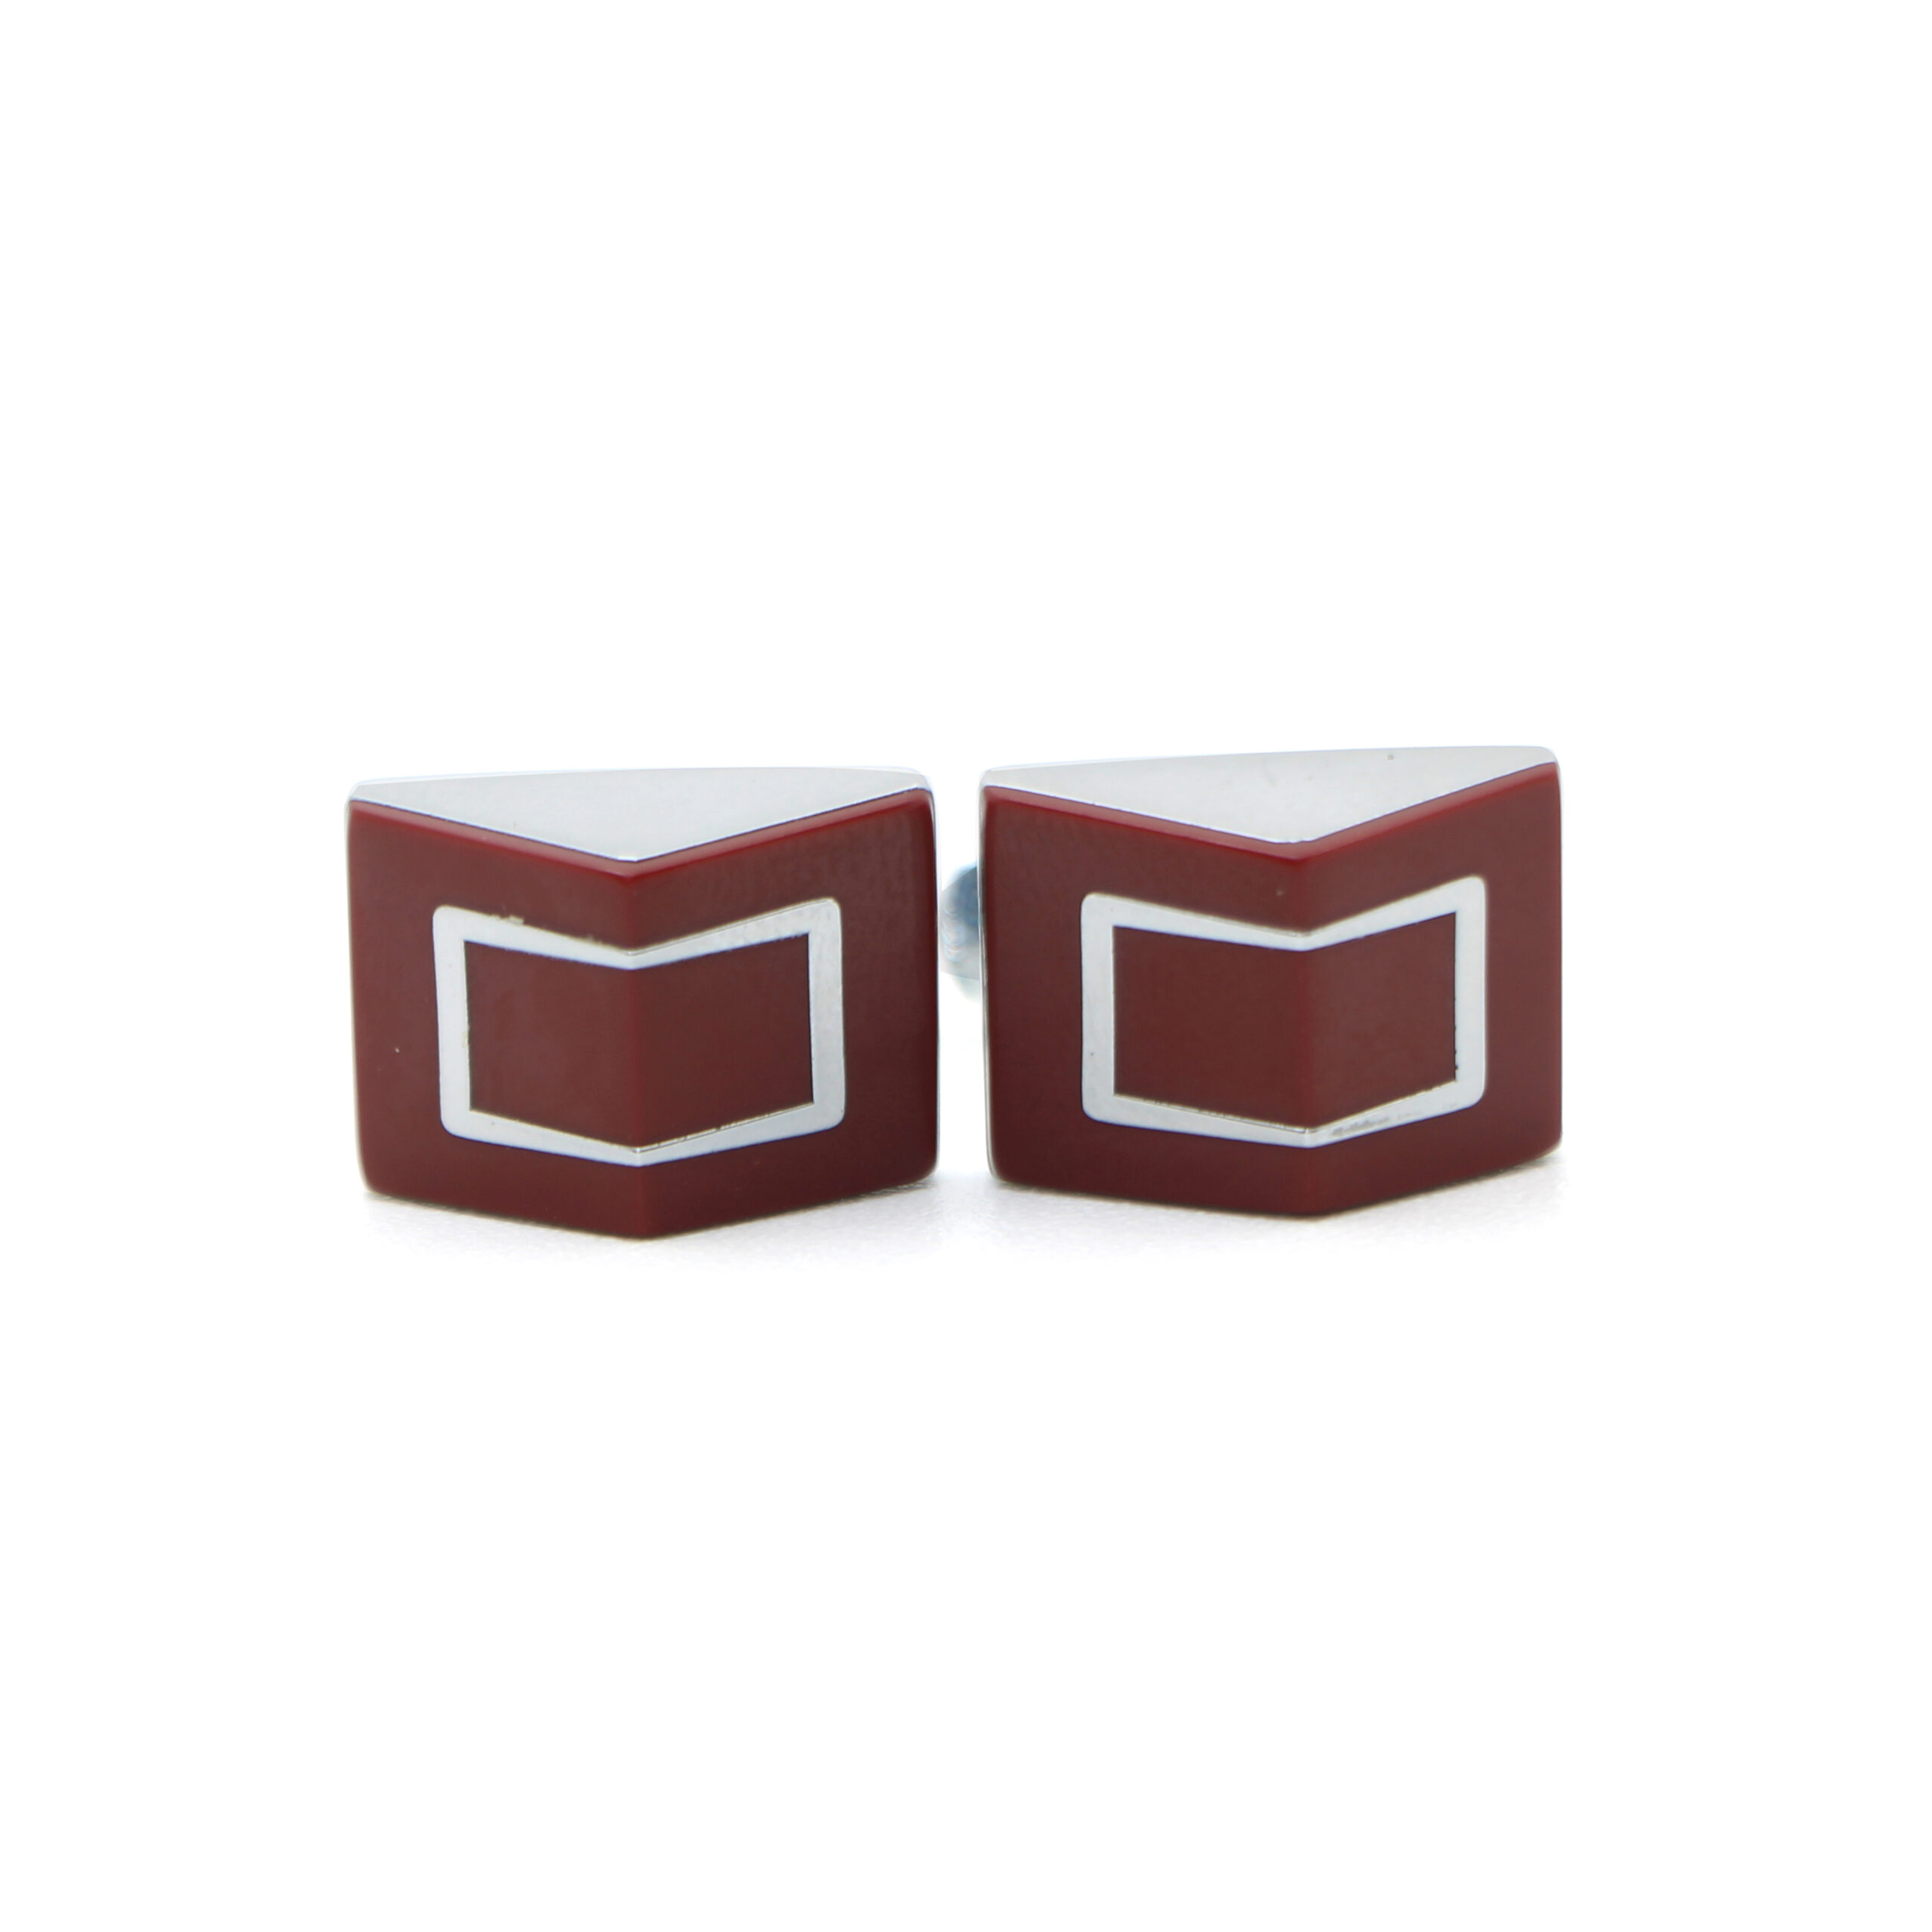 Cufflers Vintage Cufflinks for Men’s Shirt with a Gift Box – CU-1005